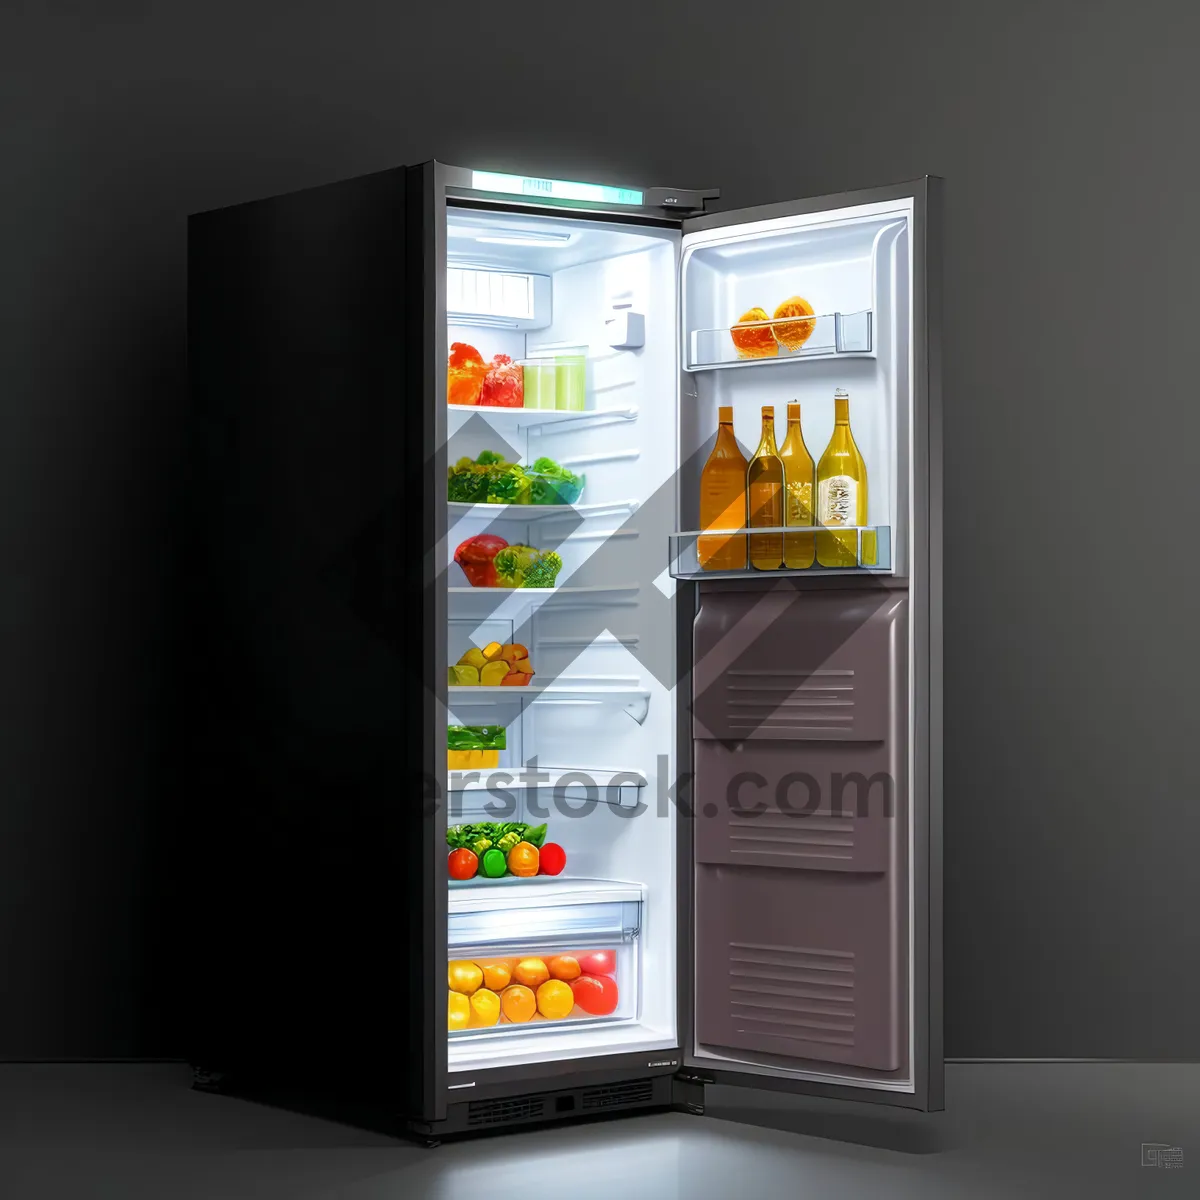 Picture of Cutting-Edge Refrigeration System for Efficient Cooling